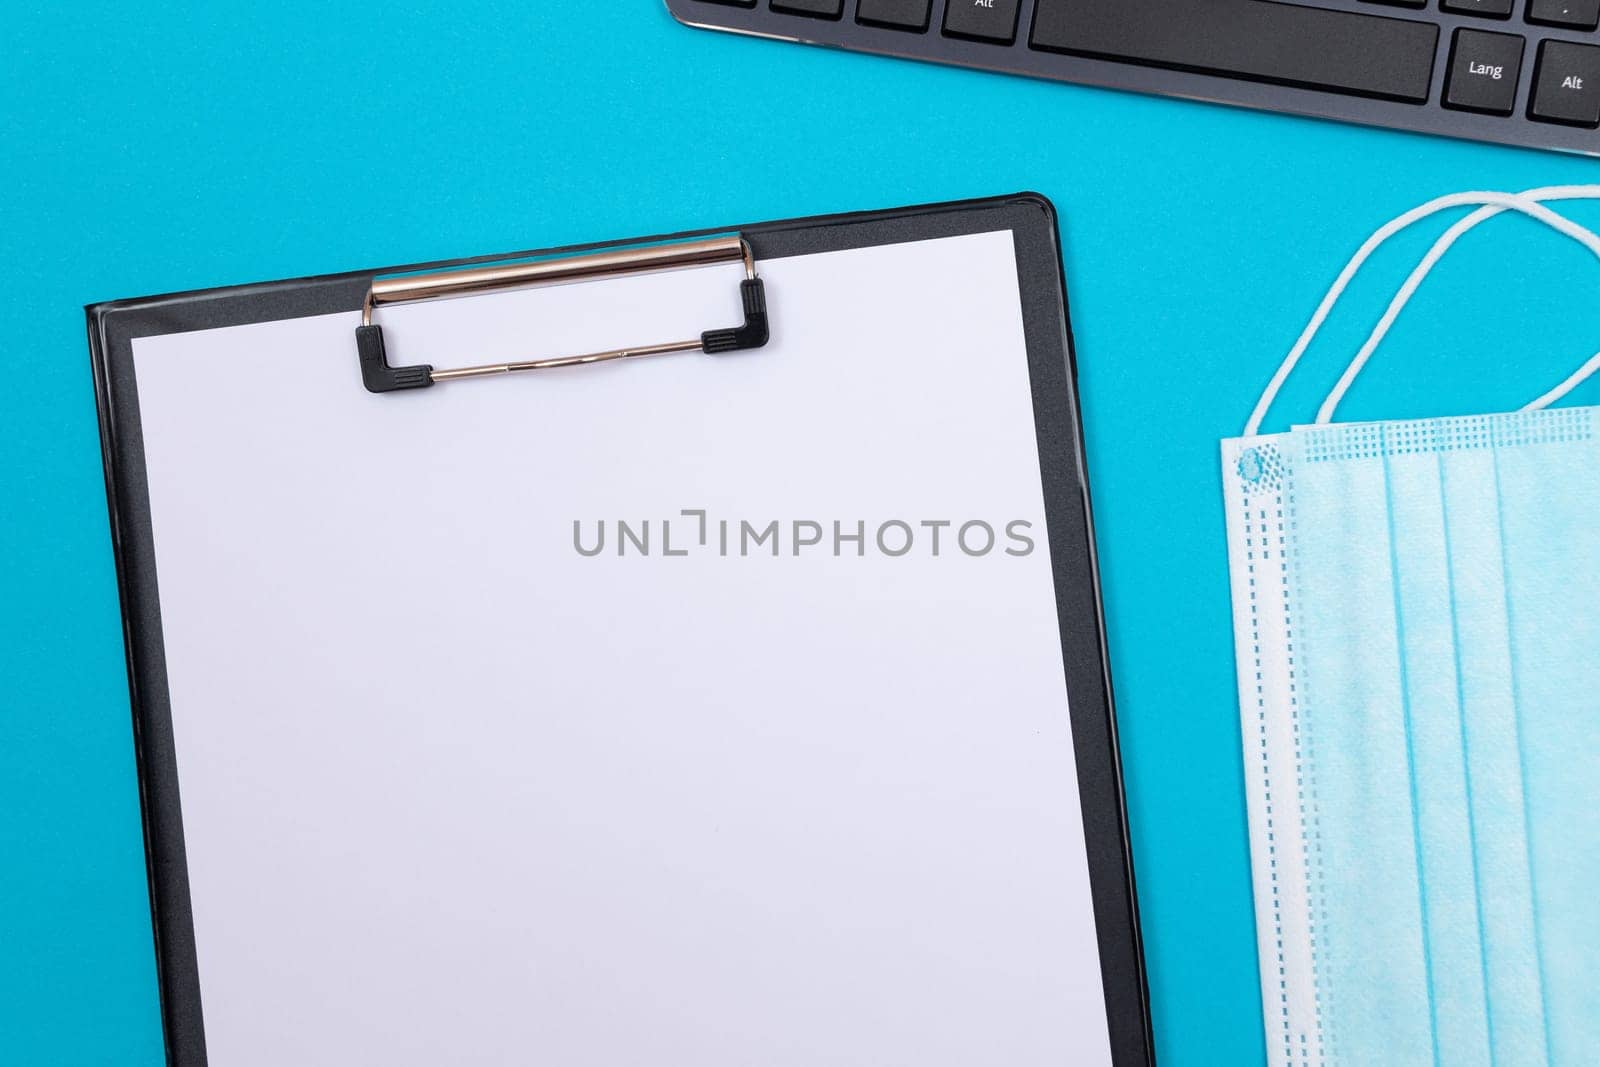 Black Clipboard with Blank White Sheet of Paper Lying on Blue Table - Top View, Flat Lay